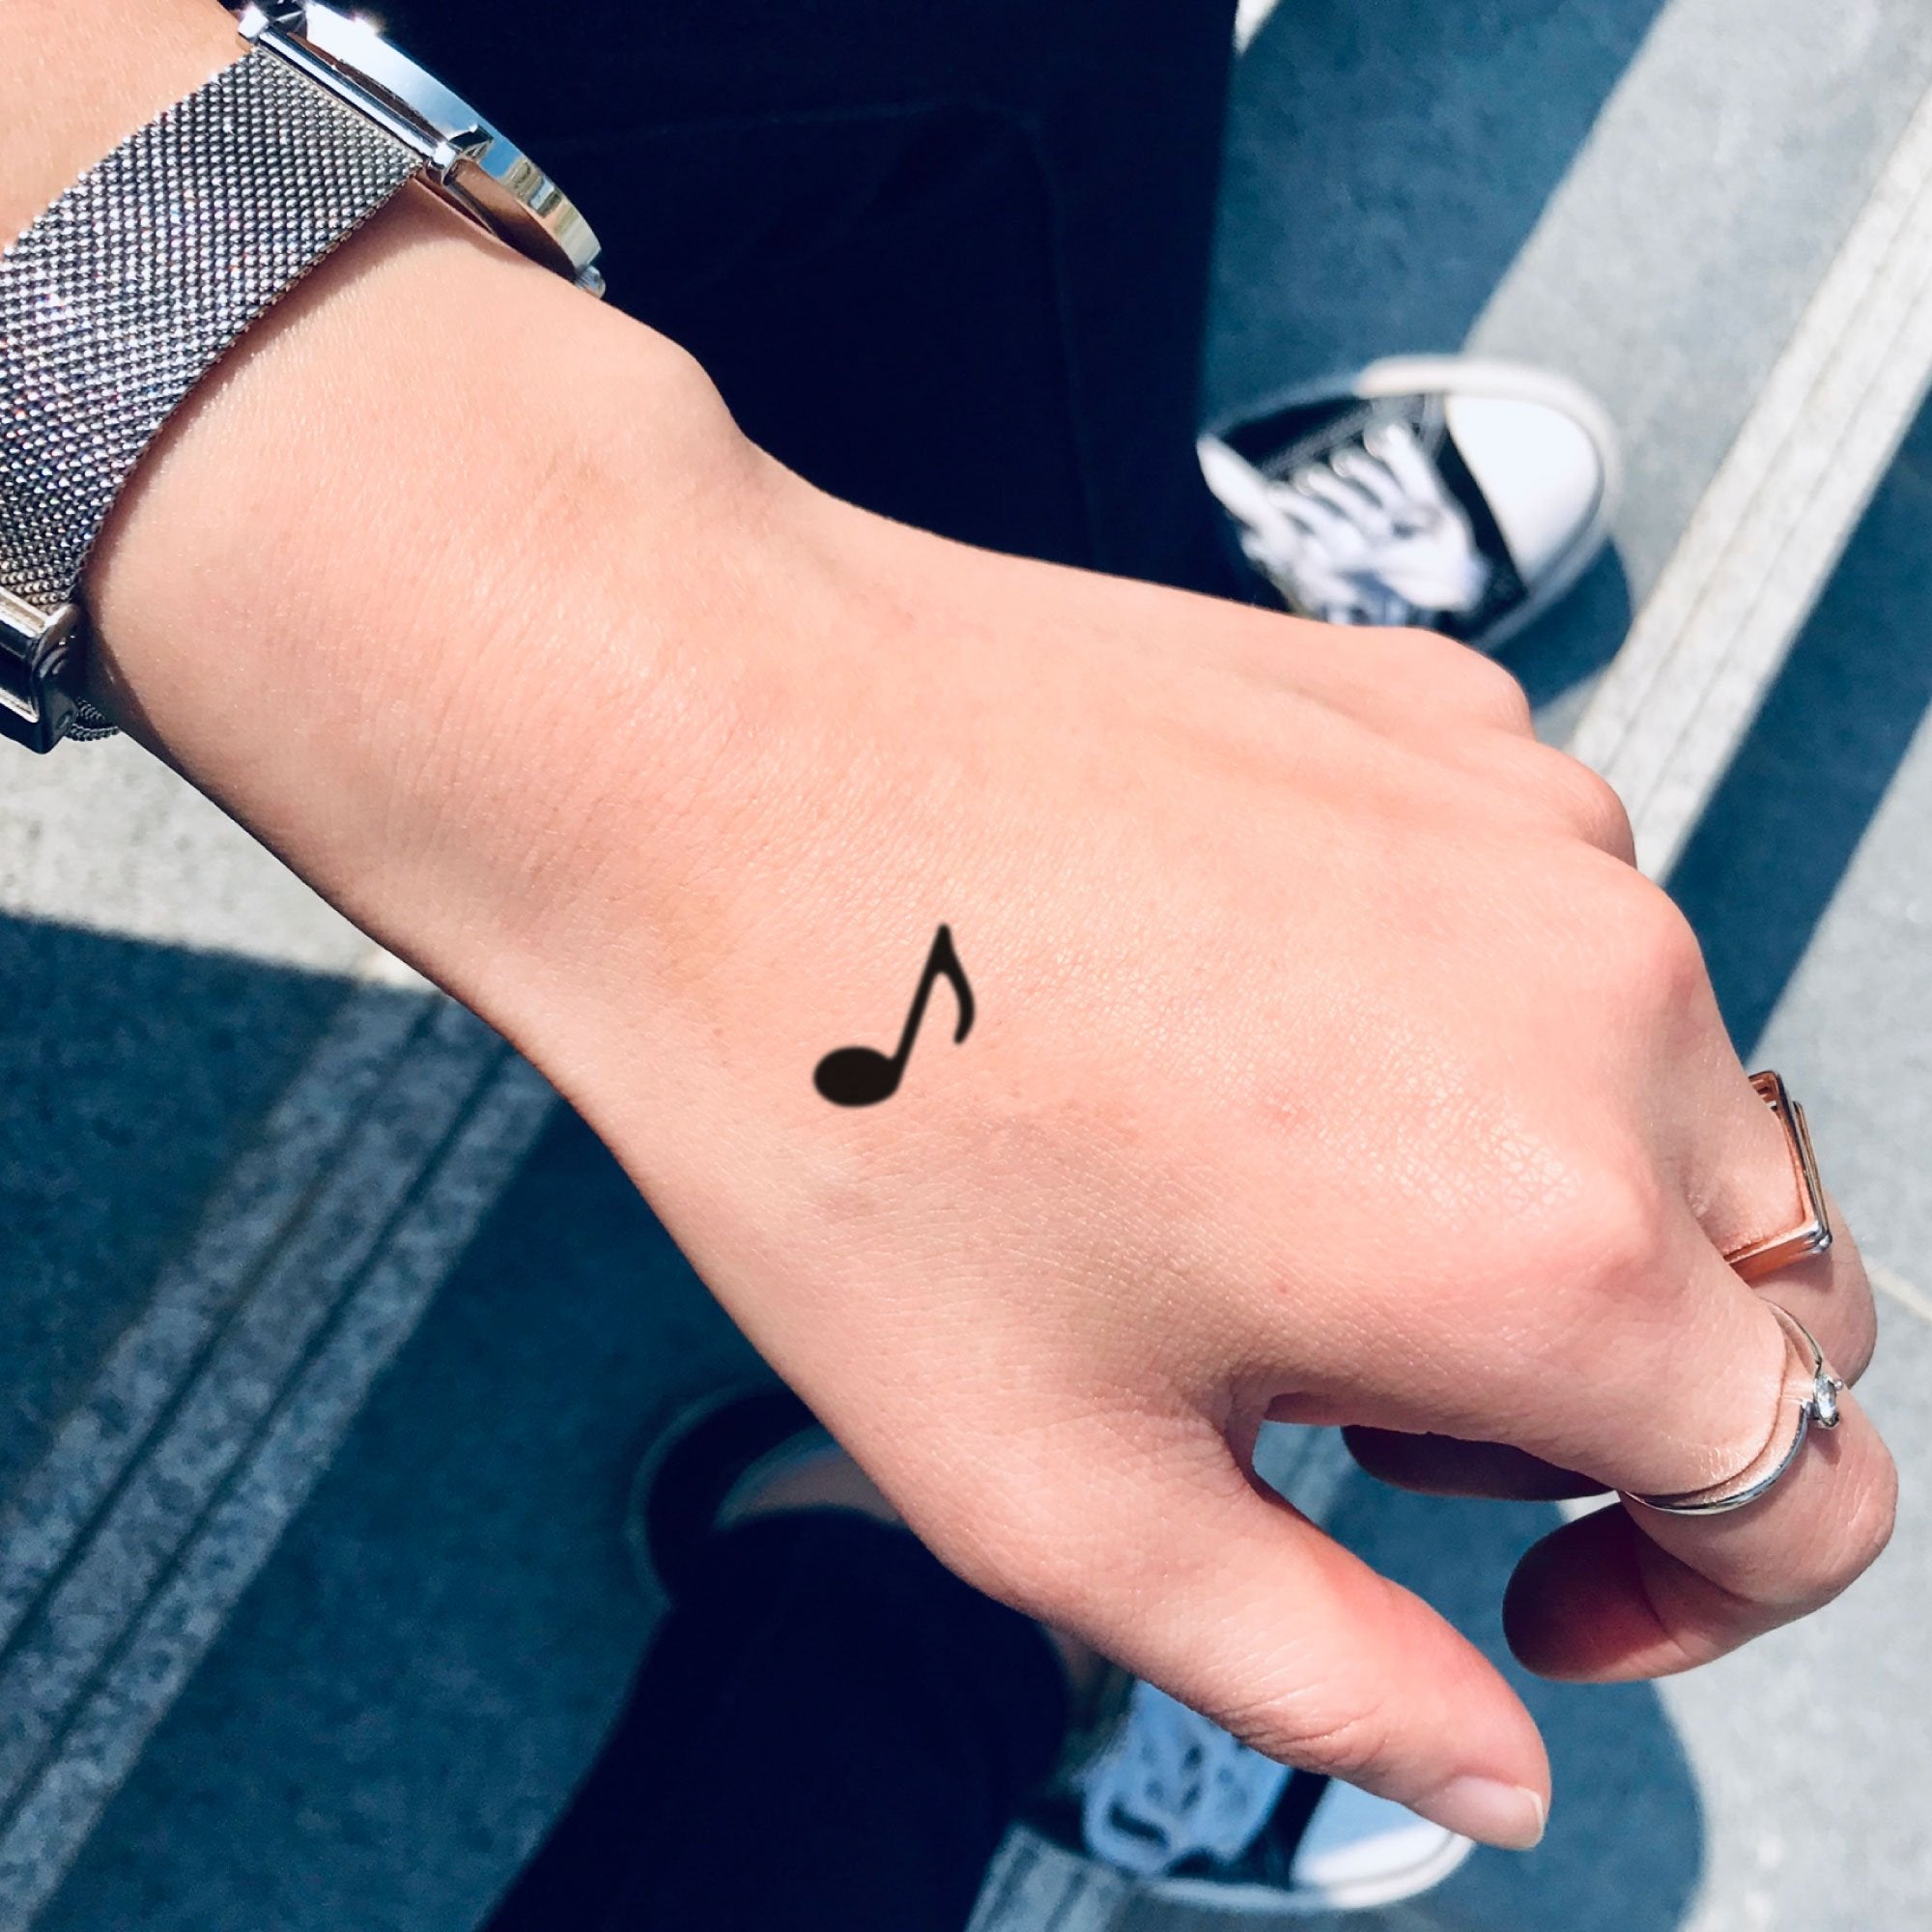 300+ Small Wrist Tattoos Ideas for Girls (2023) Women Wristband Designs  Pictures | Wrist tattoos for women, Music tattoos, Cool wrist tattoos